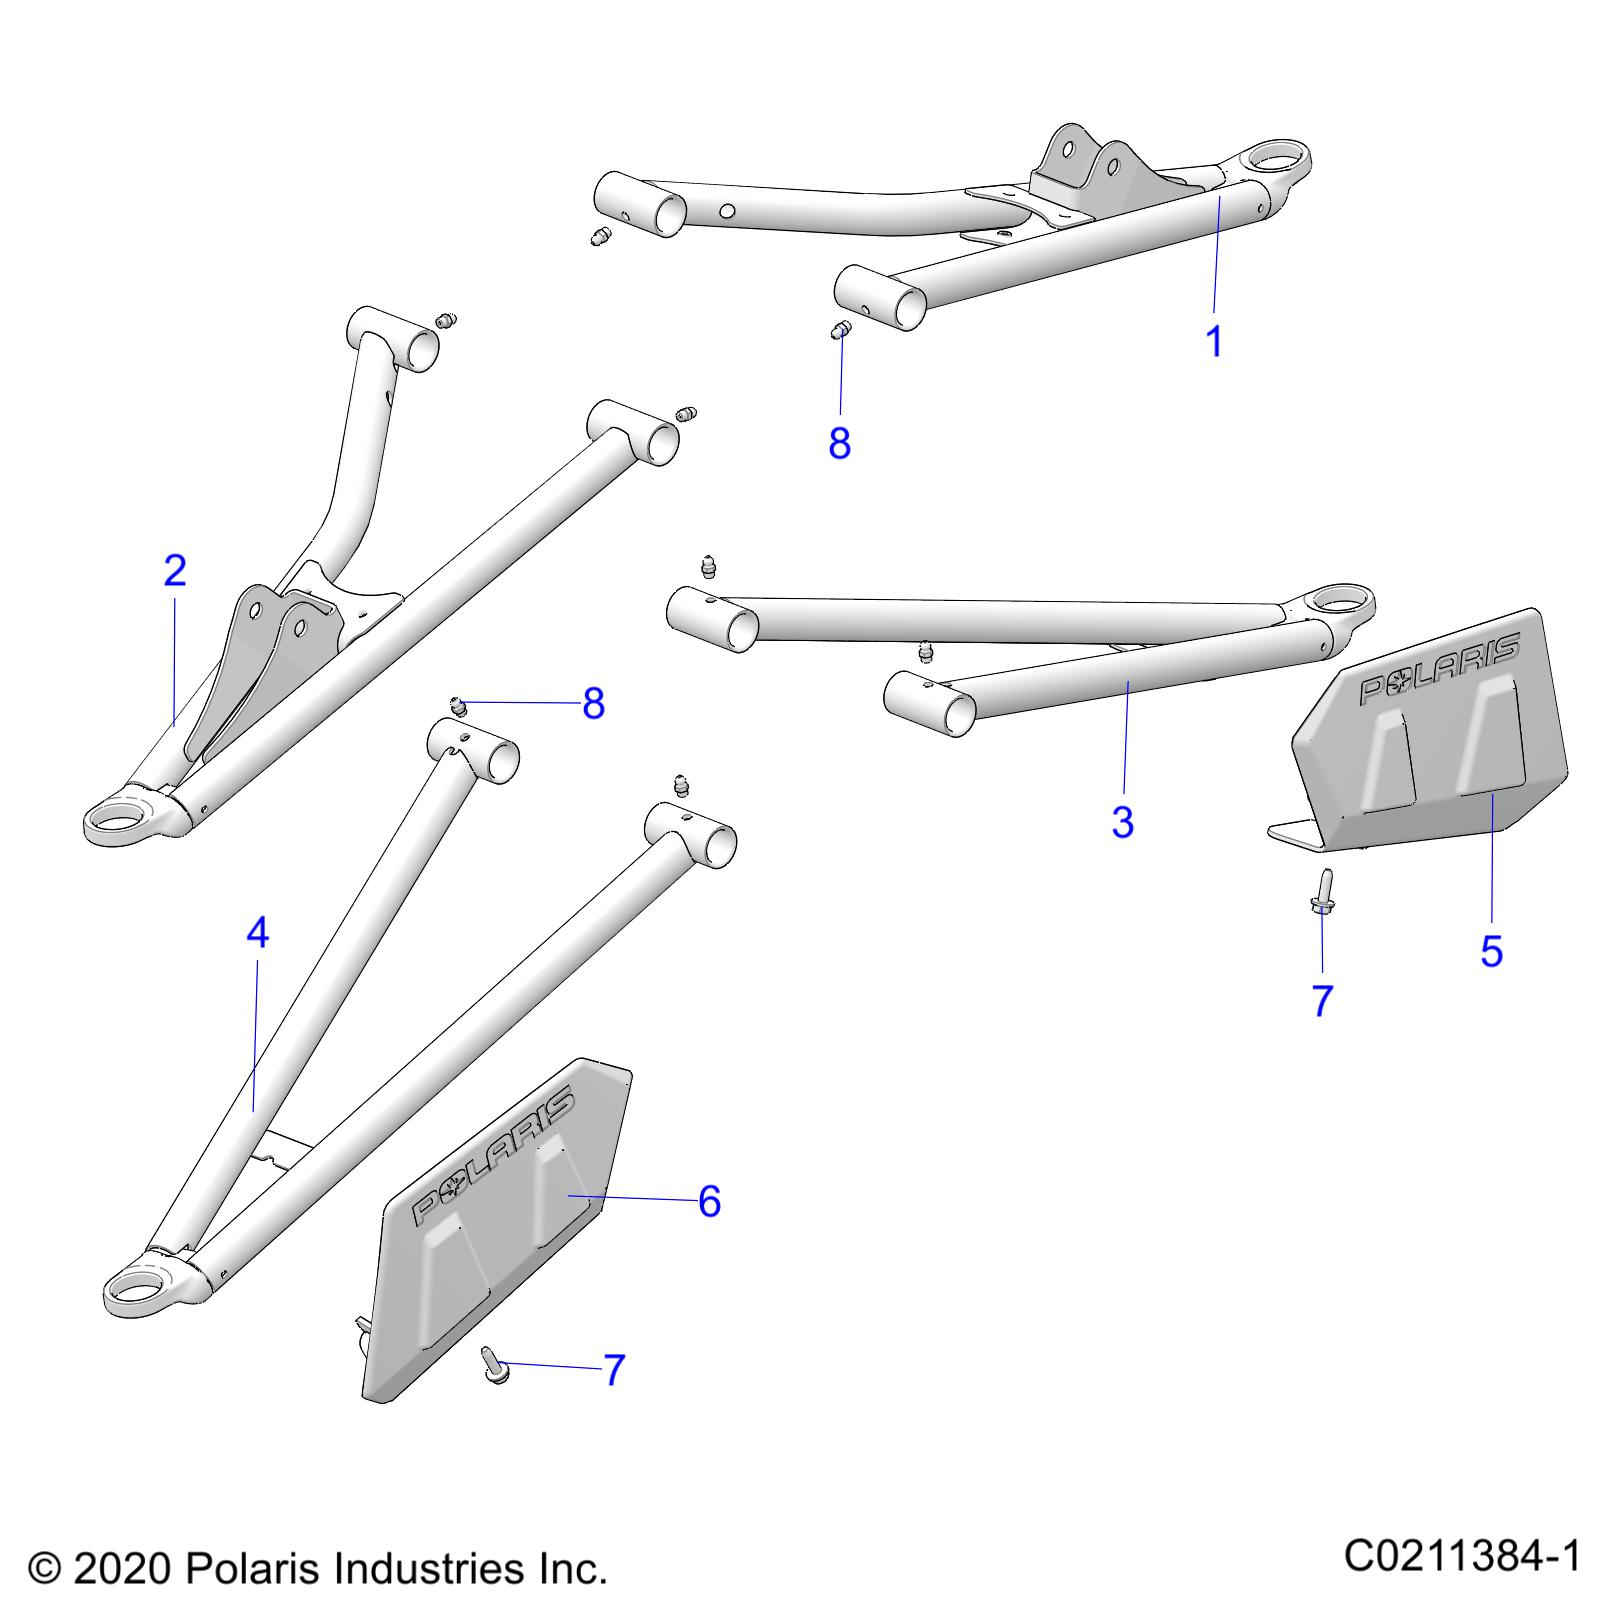 Part Number : 1019811-458 ARM CONTROL  FRONT  LOWER  RIG